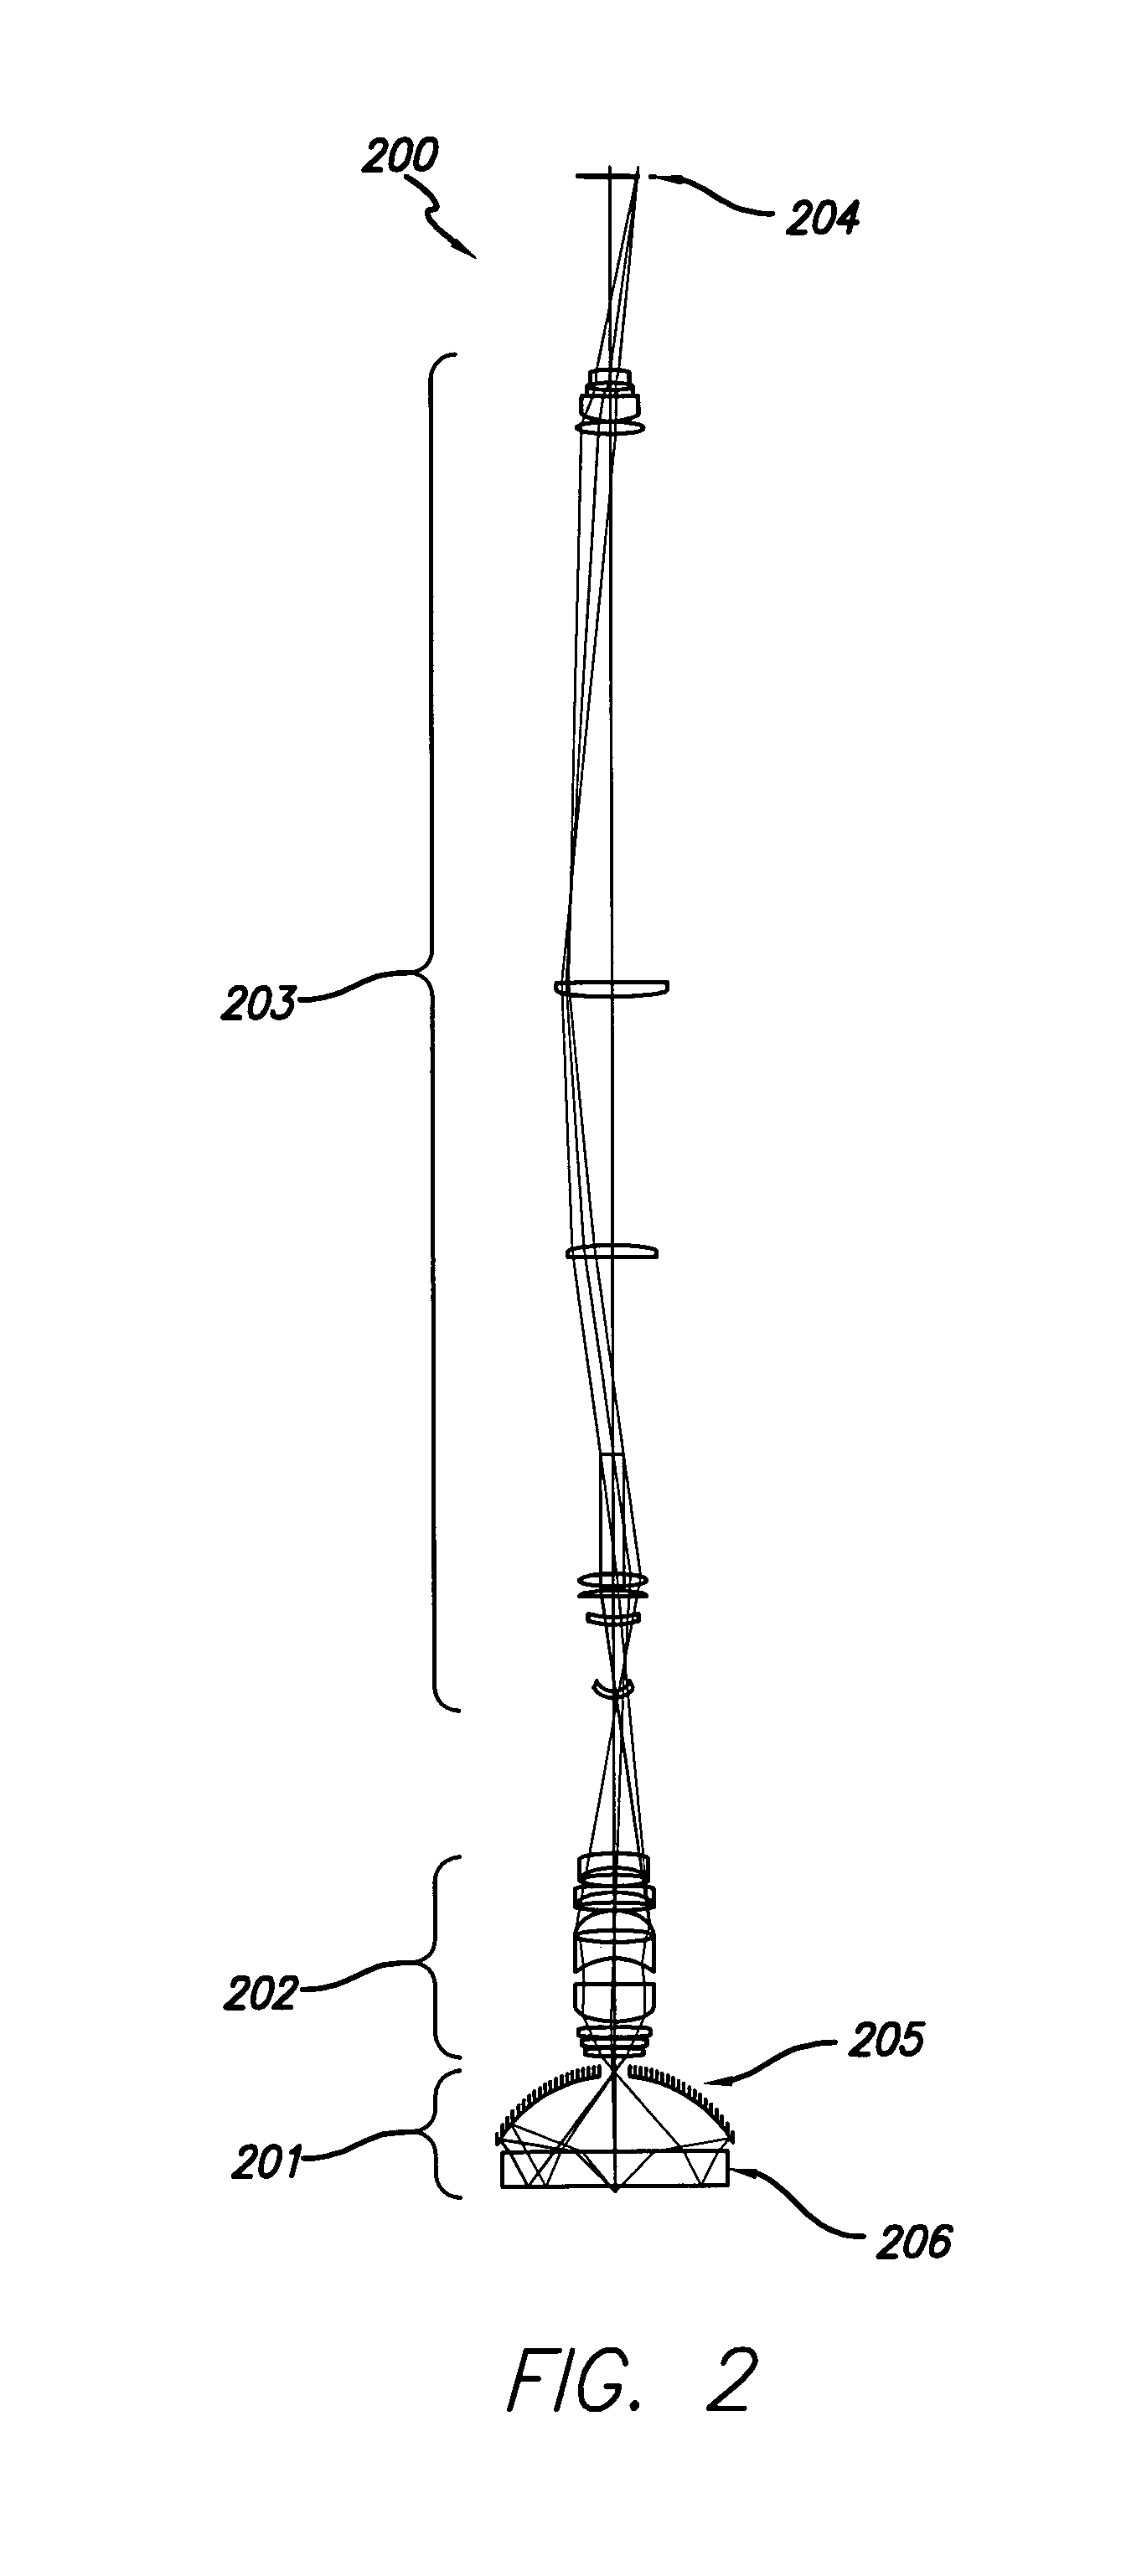 Beam delivery system for laser dark-field illumination in a catadioptric optical system